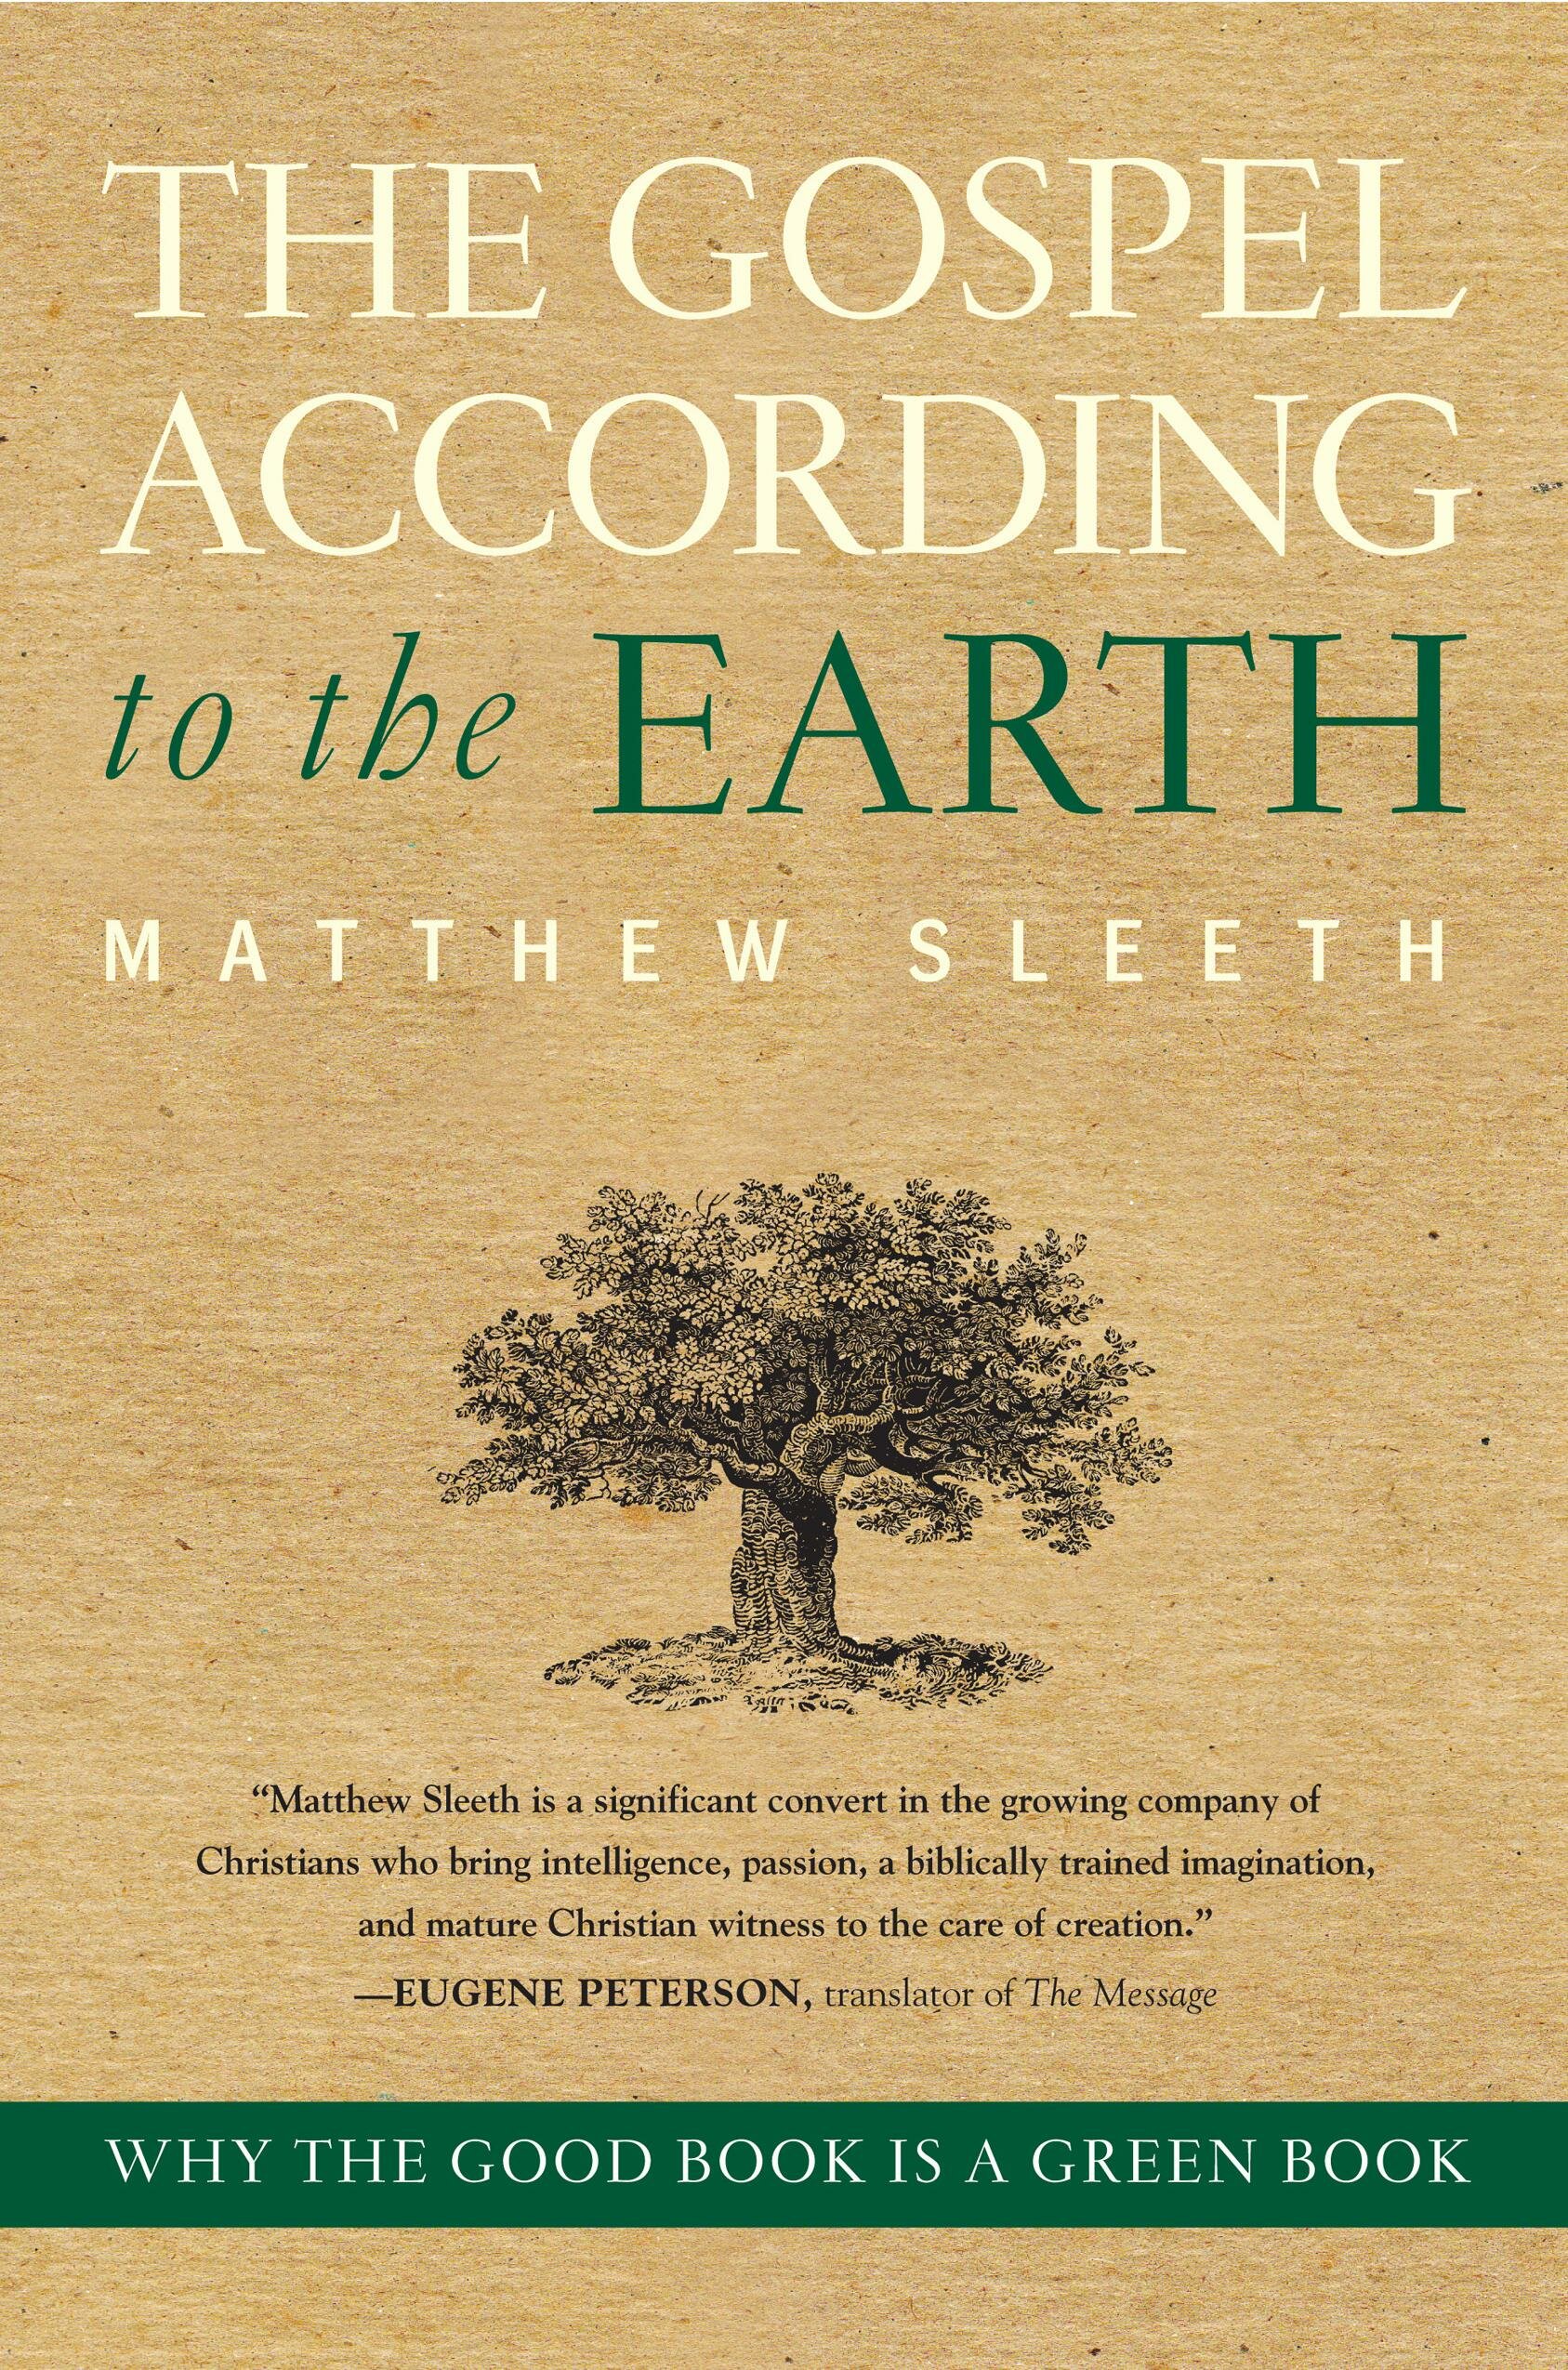 The Gospel According to the Earth: Why the Good Book Is a Green Book J. Matthew Sleeth